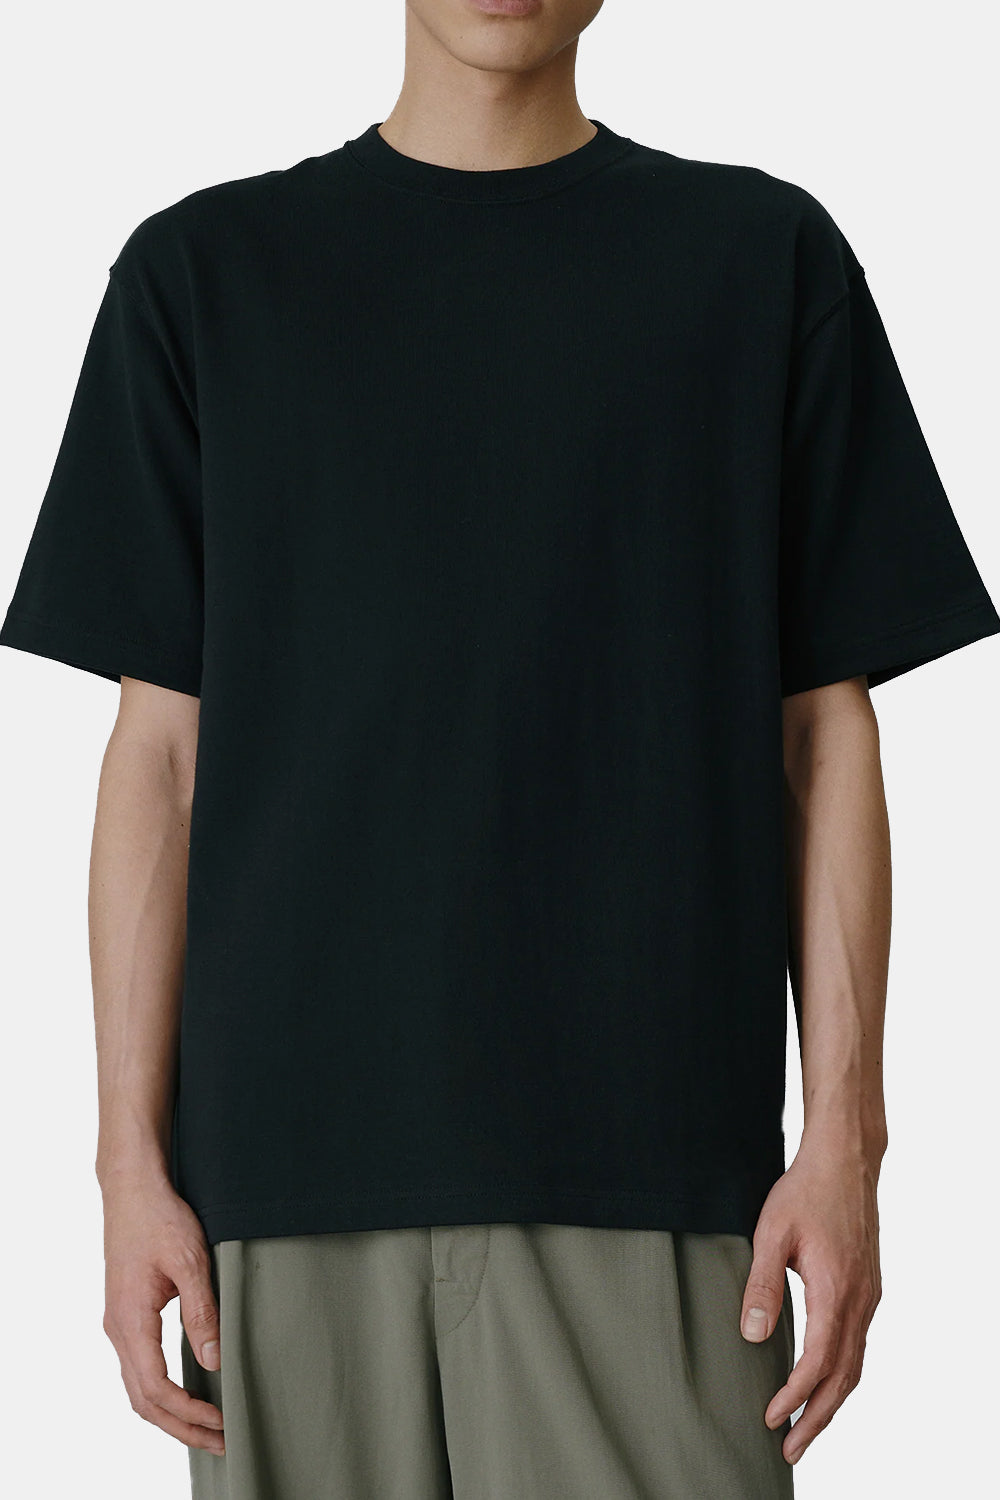 United Athle Japan Made Wide Fit T-shirt (Black)